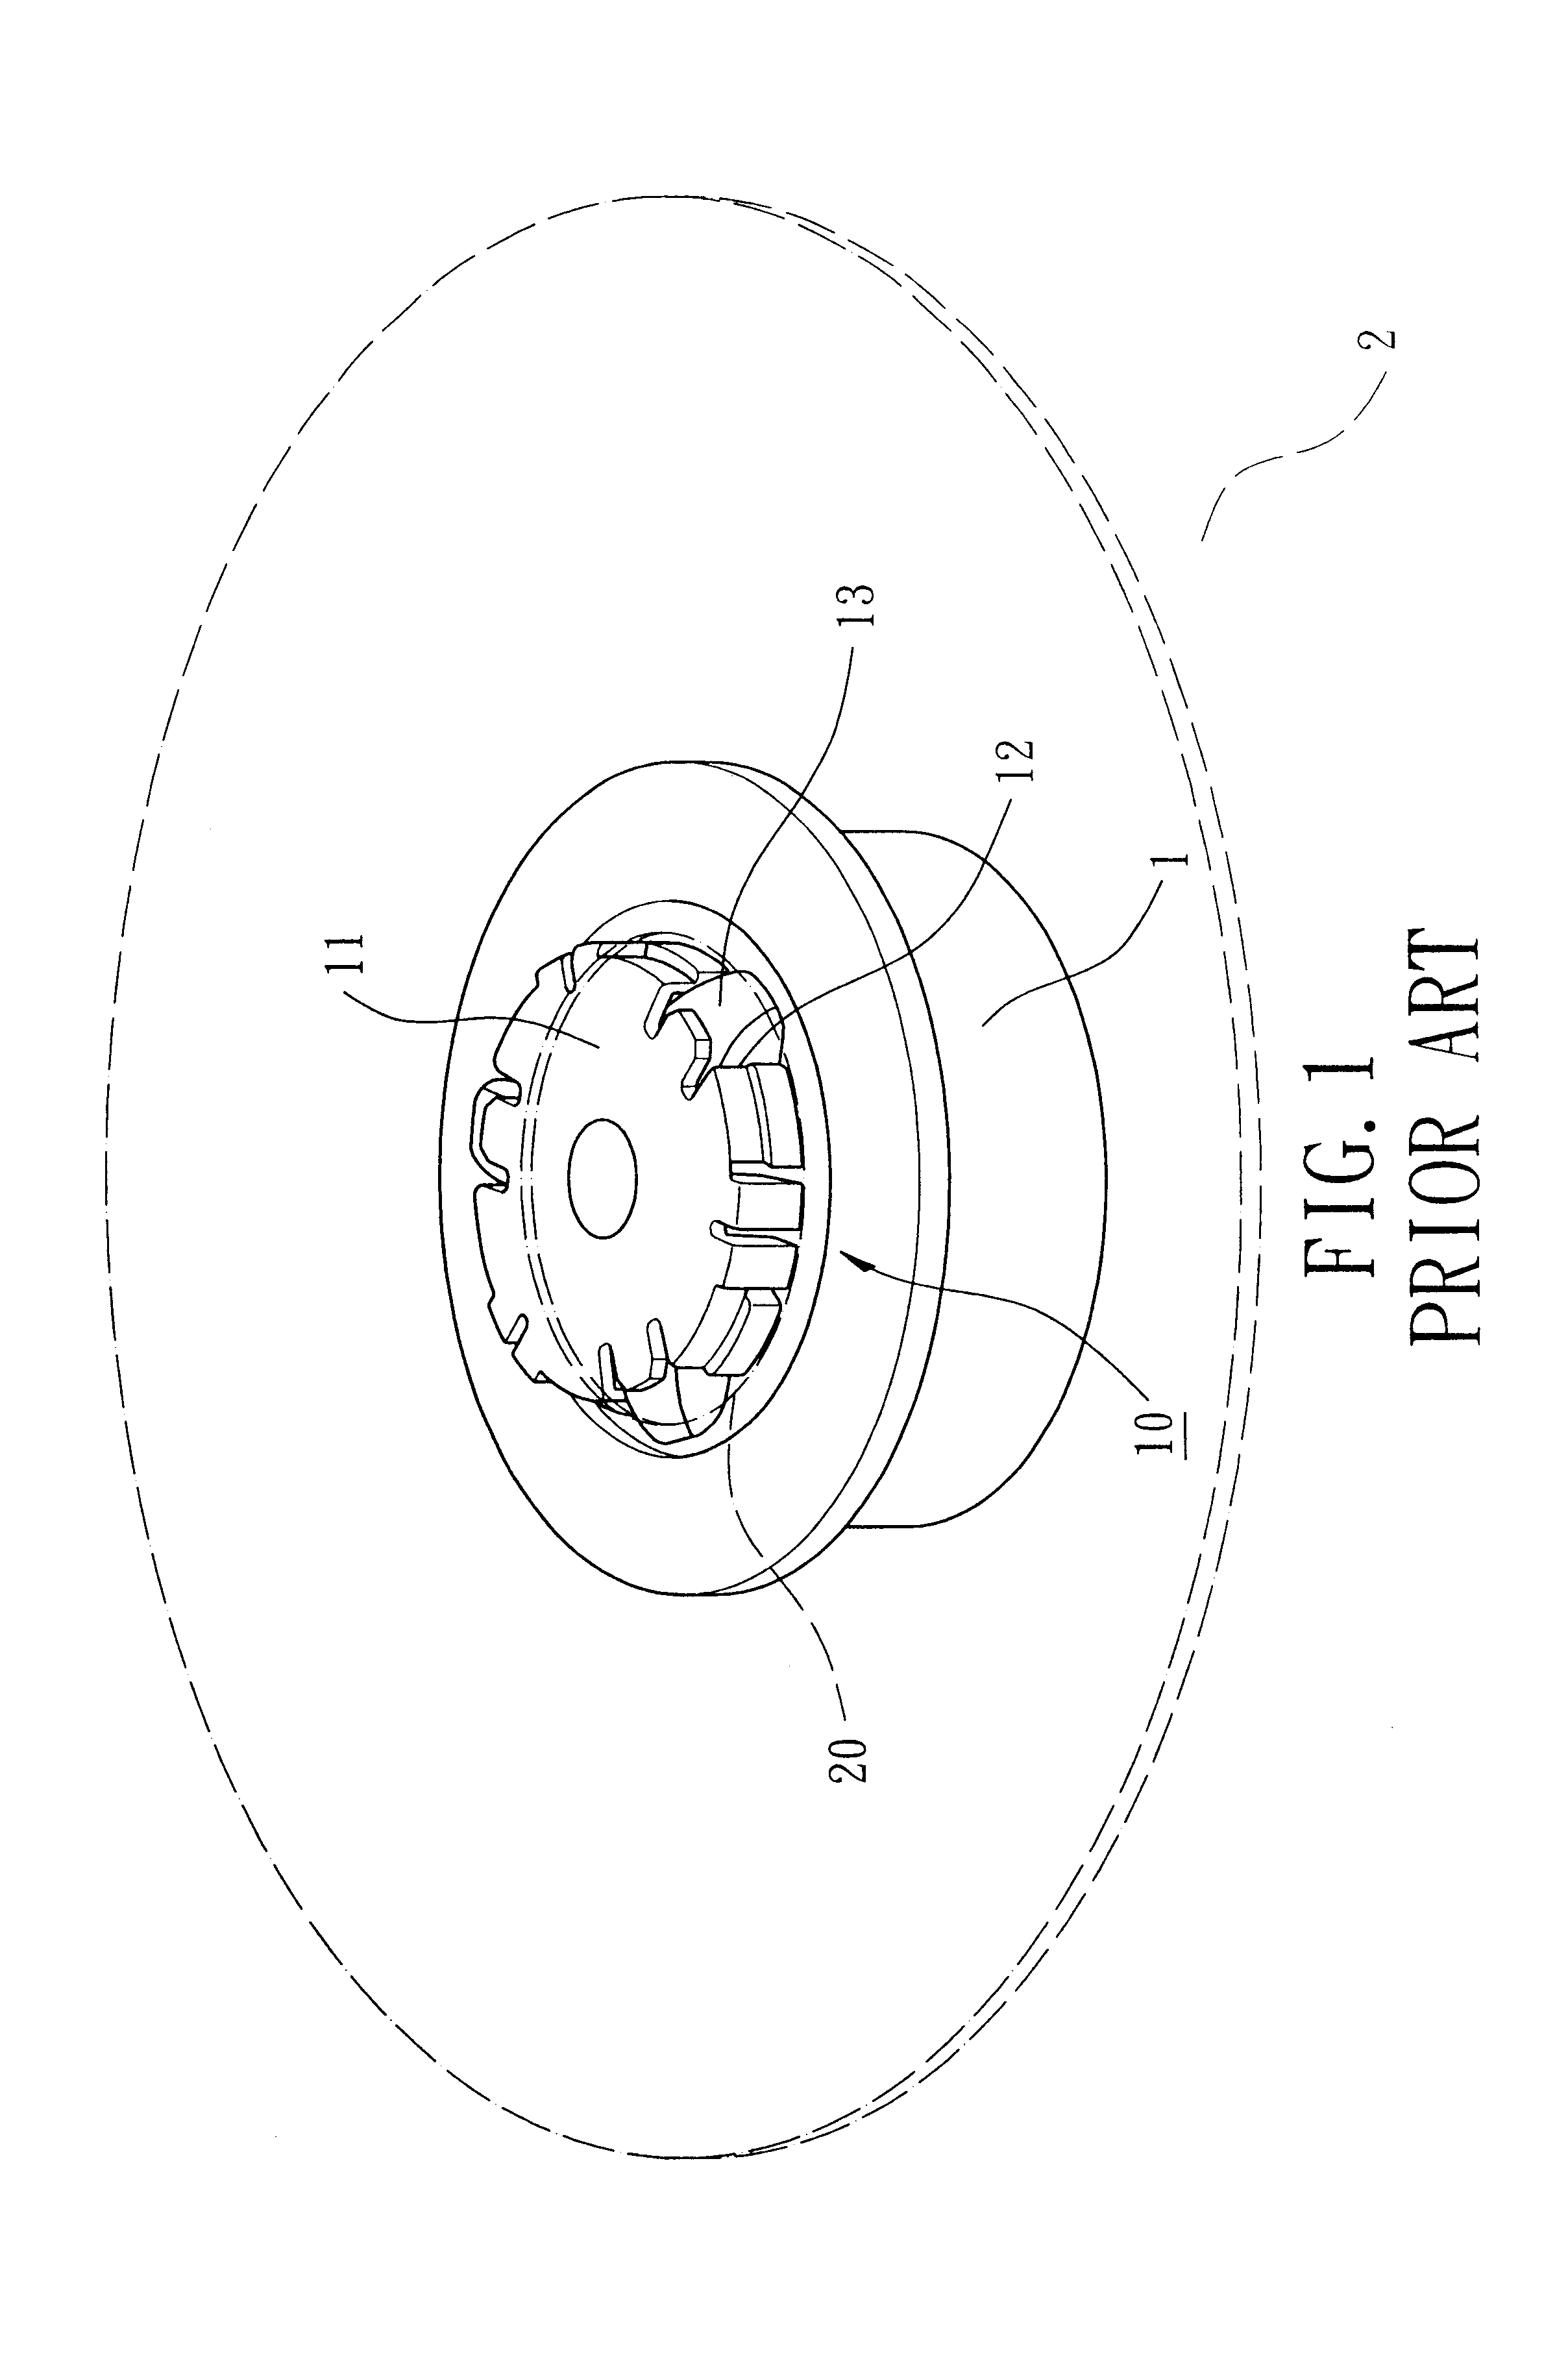 Device with spring-loaded curved tongues for holding an optical disk around a rotary shaft of a motor